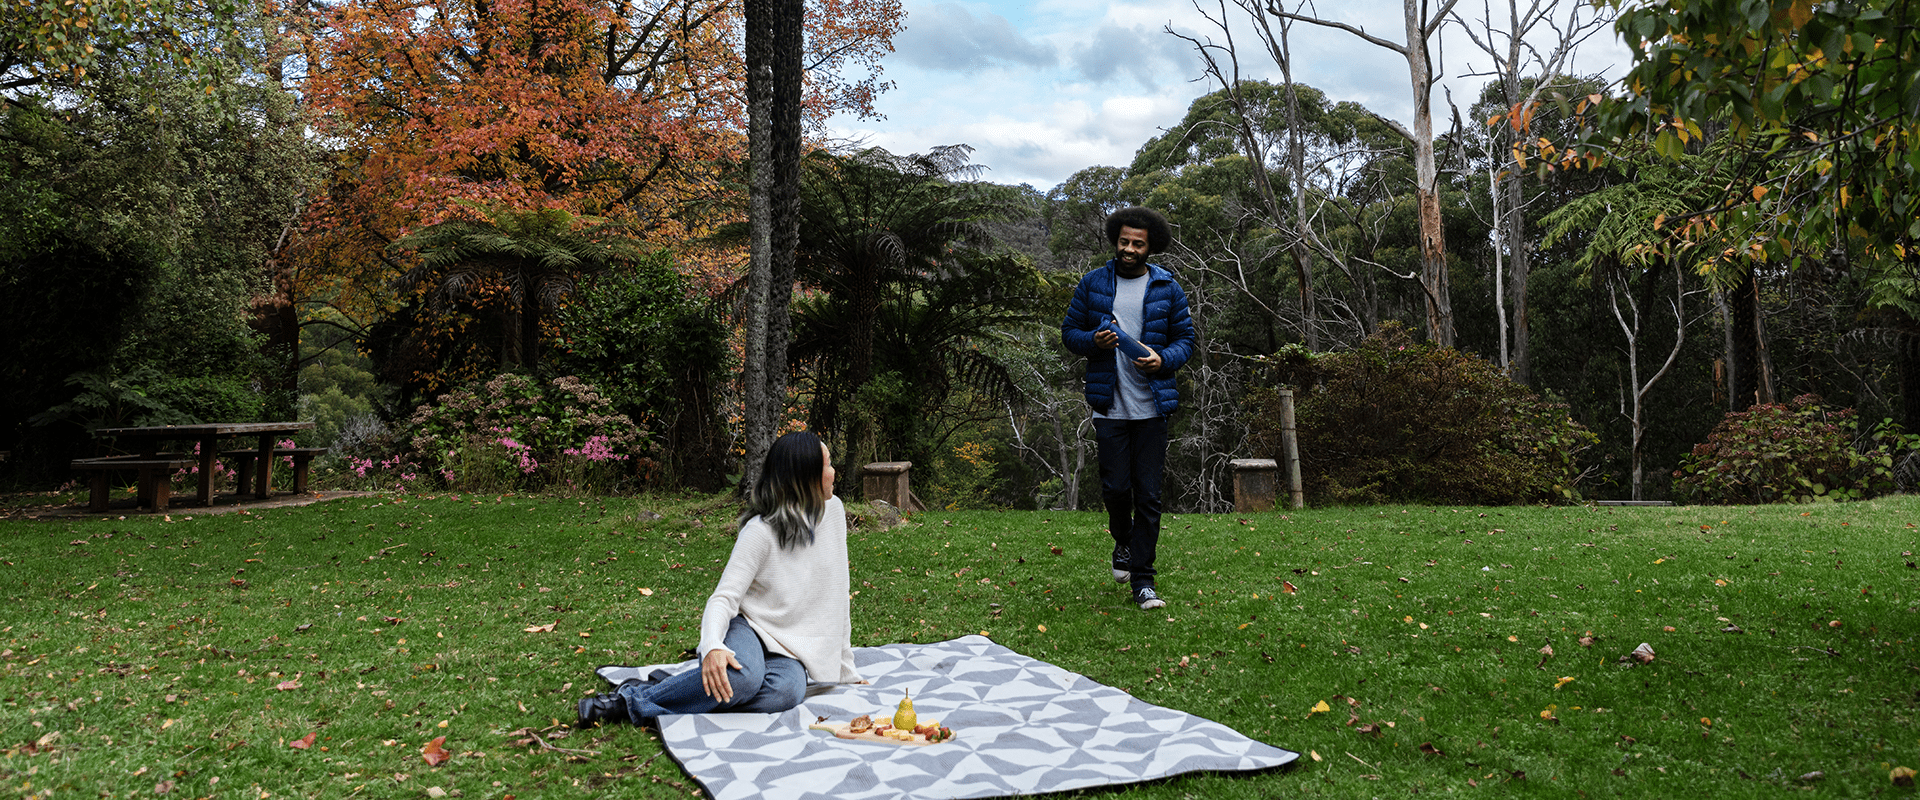 A couple enjoying a picnic of cheese and fruit on a rug on grass, a tall tree fern sits behind them and deciduous trees in autumn colour.